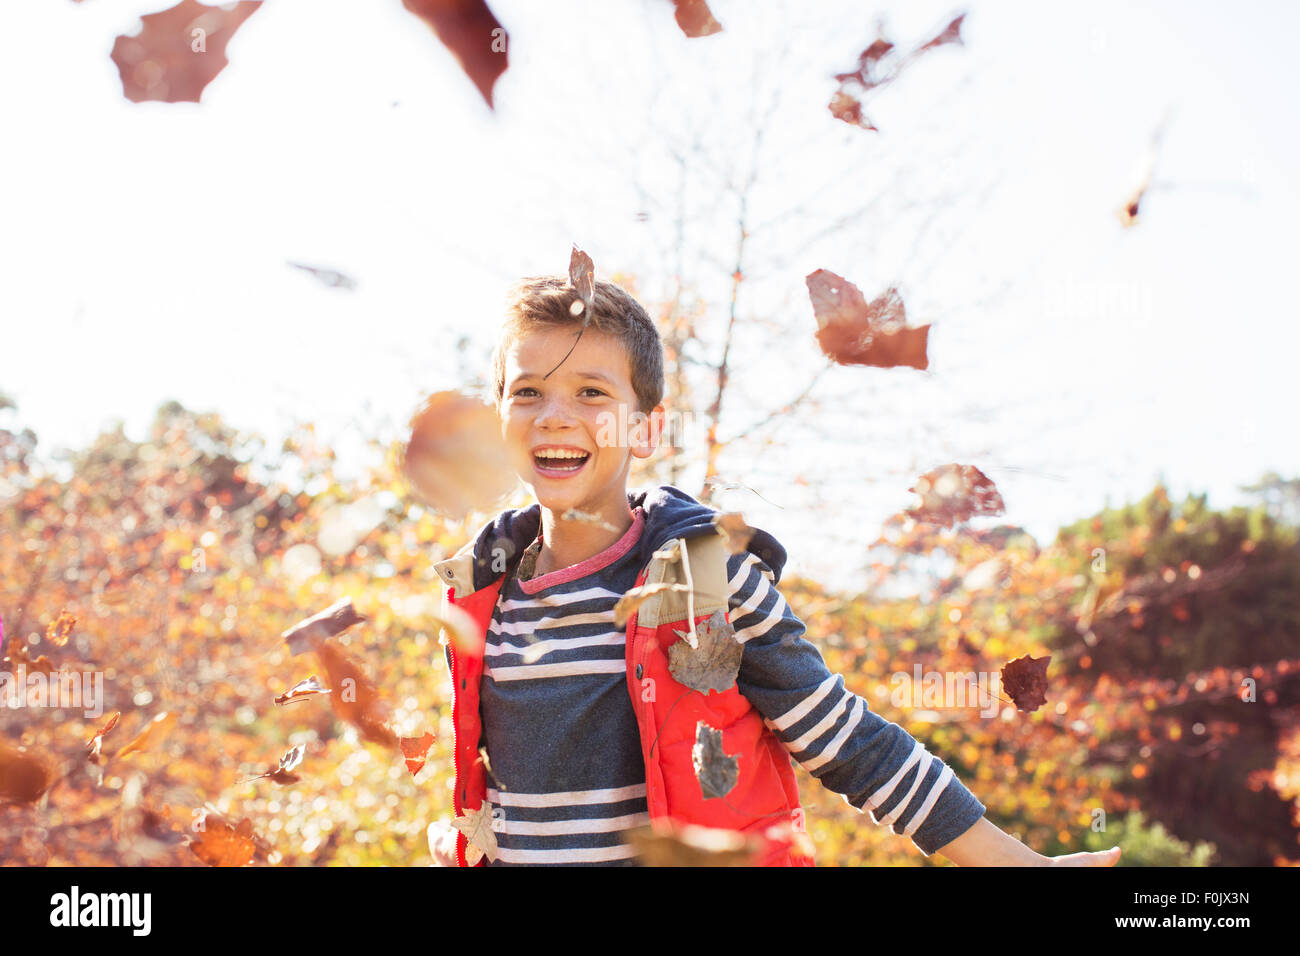 Portrait of enthusiastic boy throwing autumn leaves Stock Photo